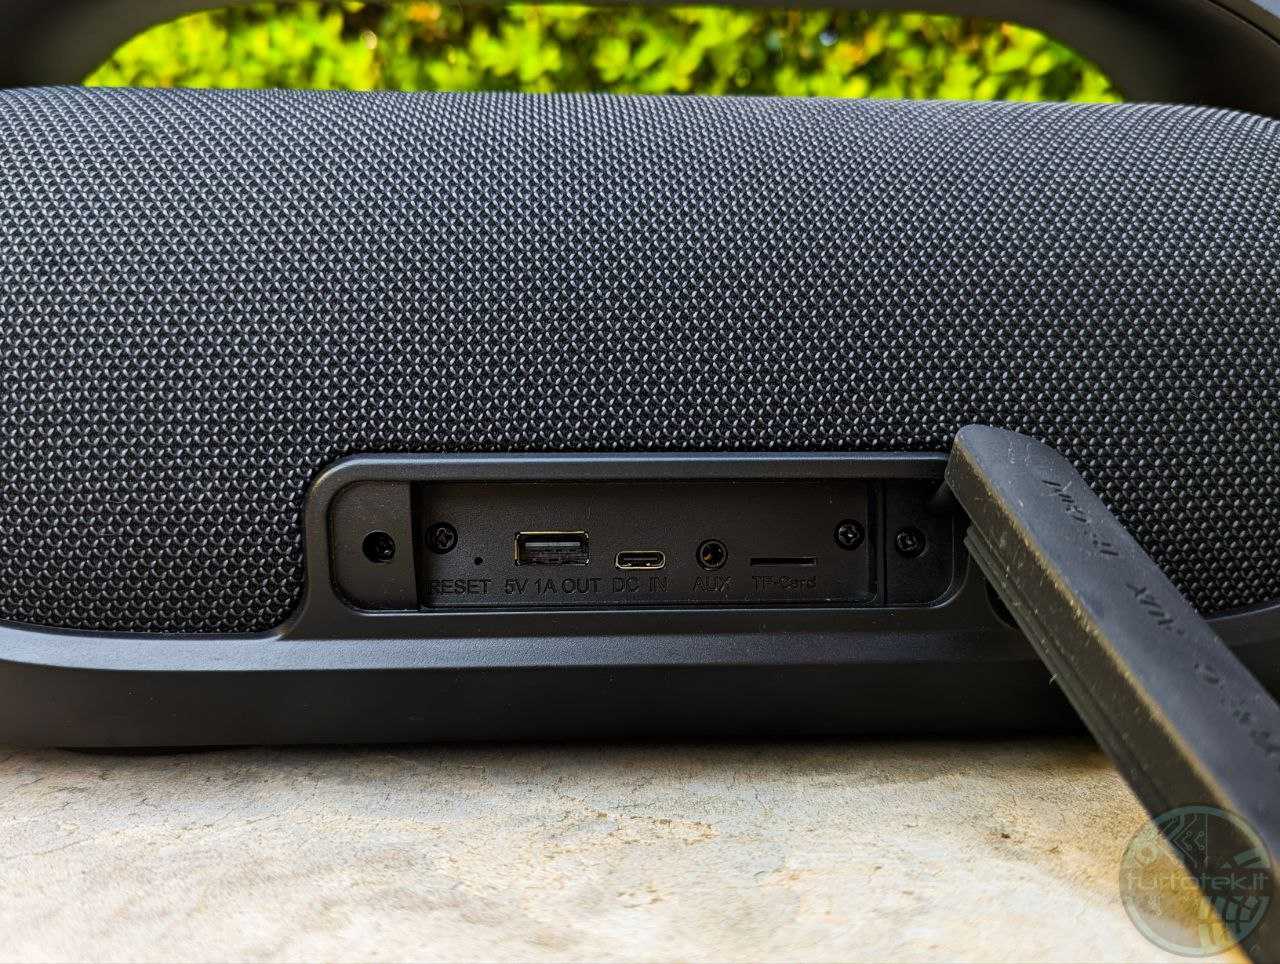 Tronsmart Bang review: the perfect companion for the summer